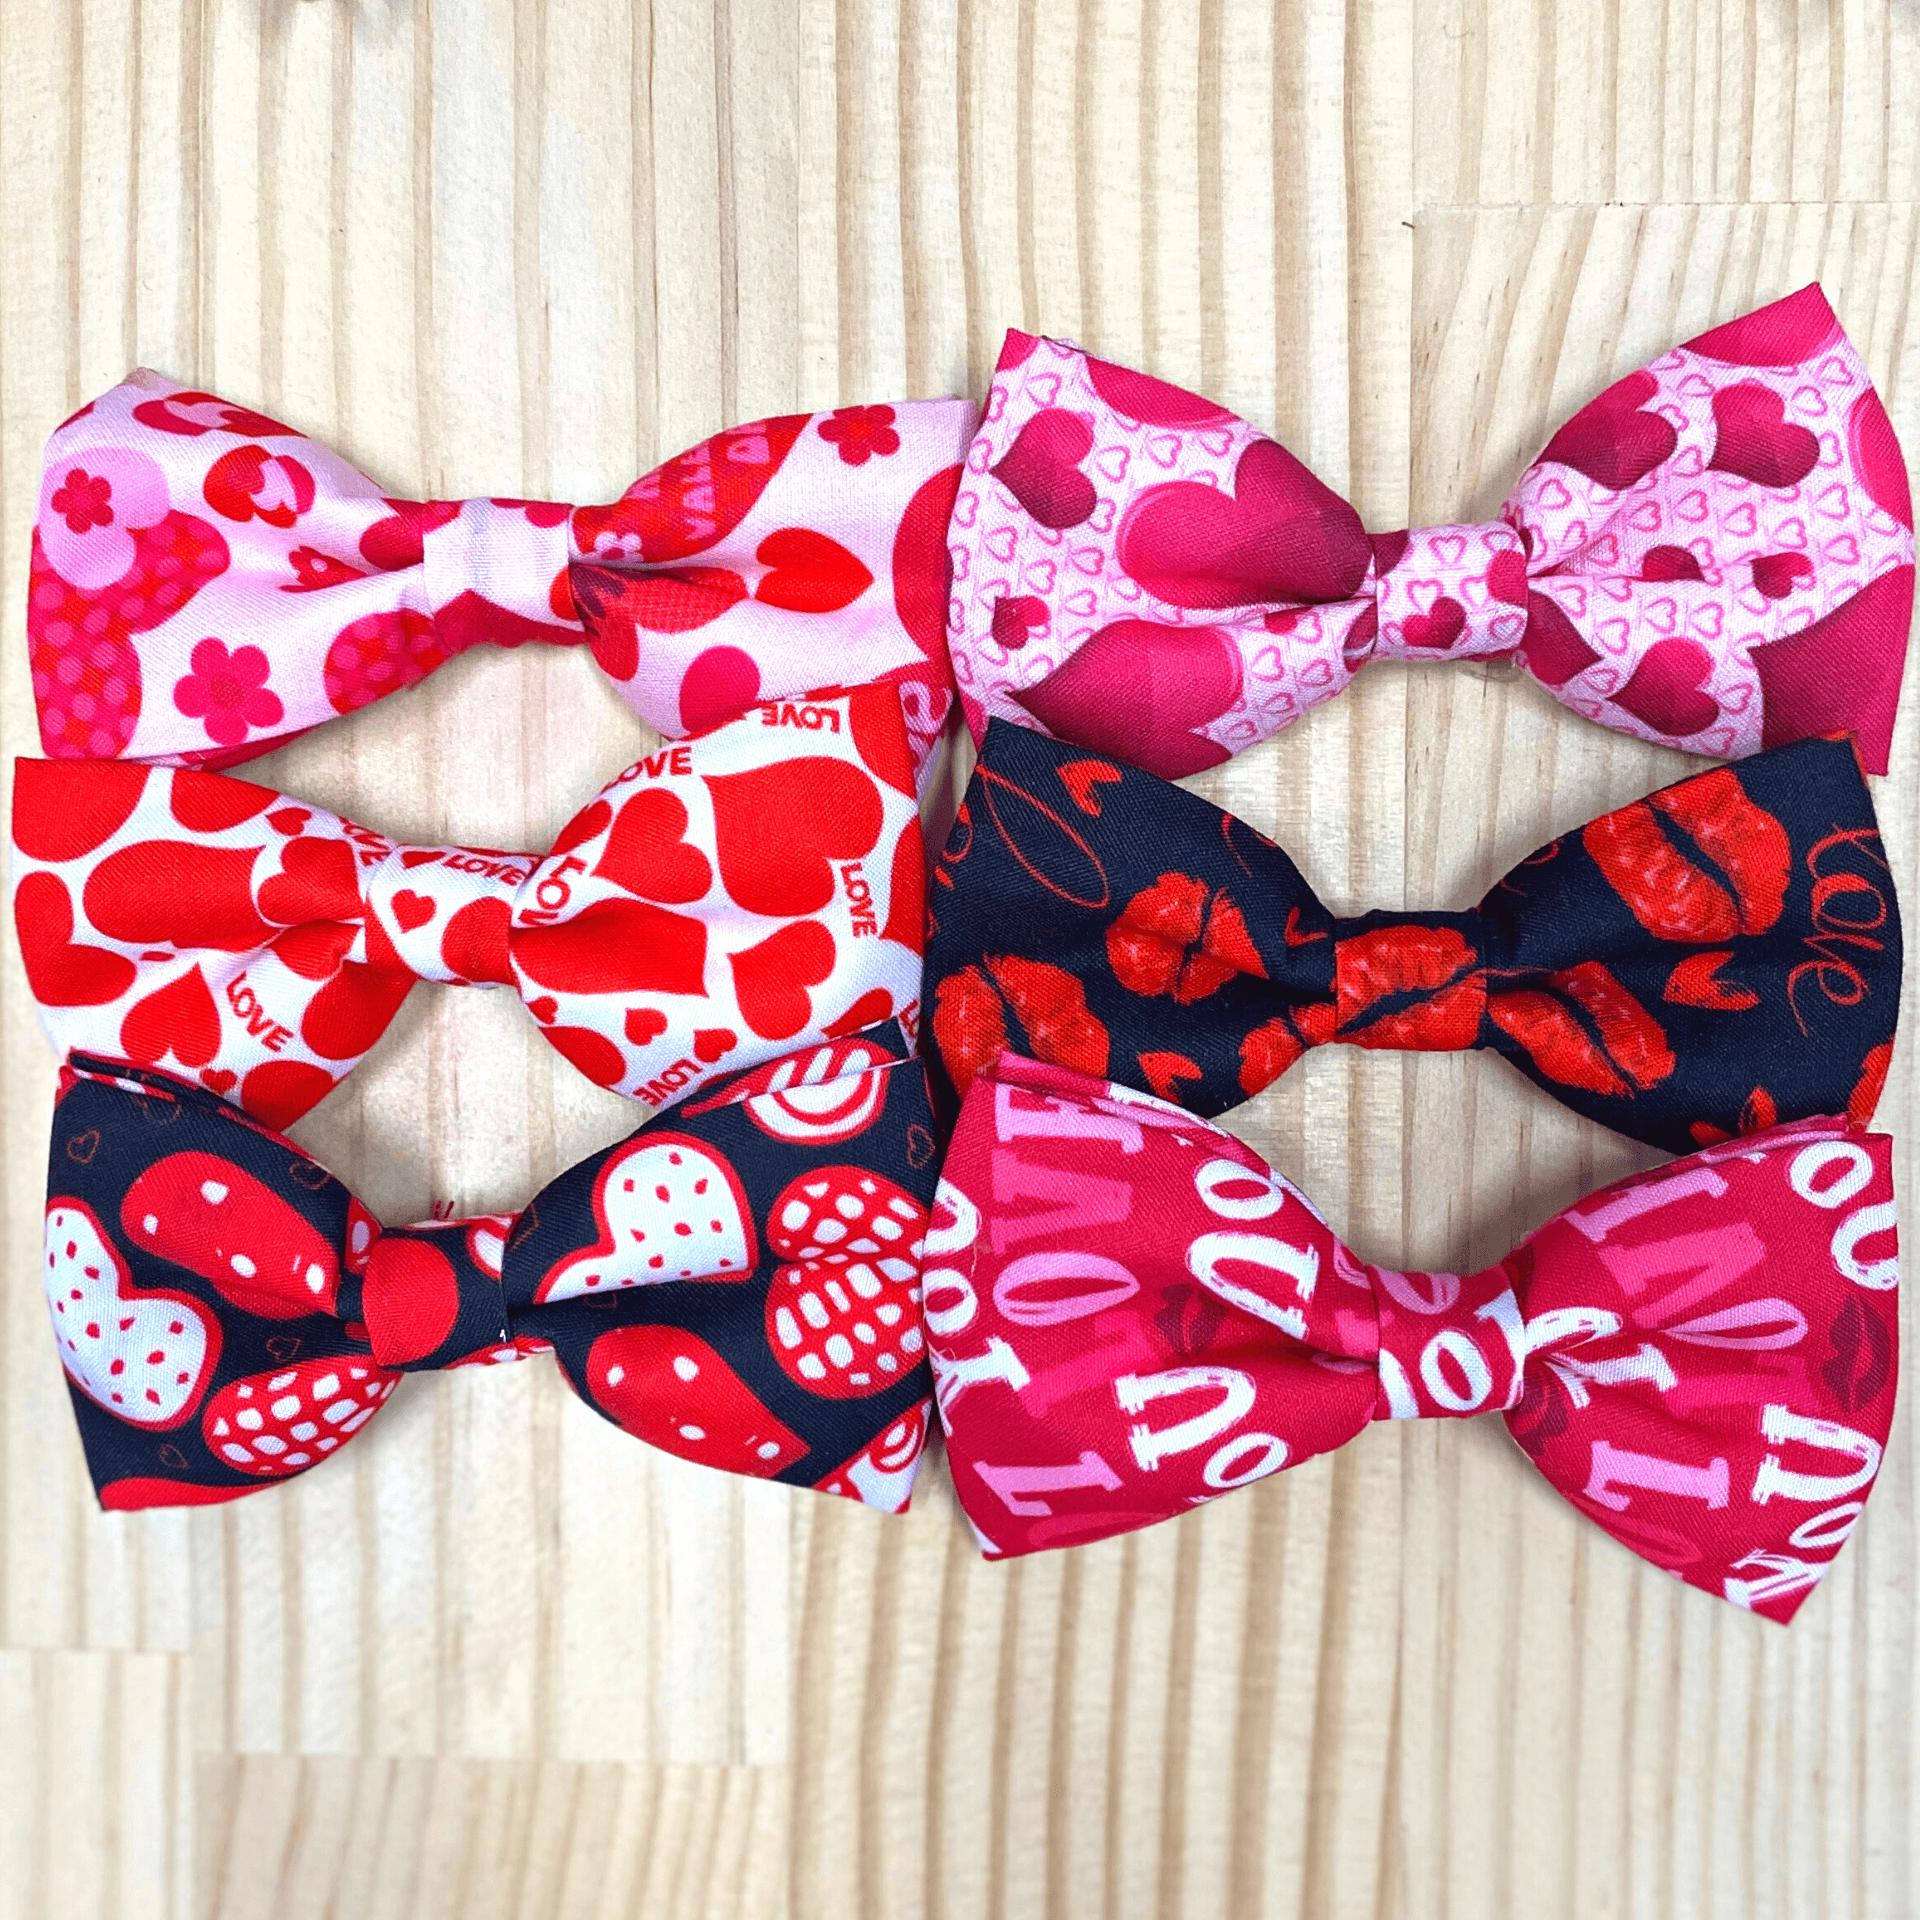 Valentine love dog bow fashion accessory red cream with red hearts, let's pawty